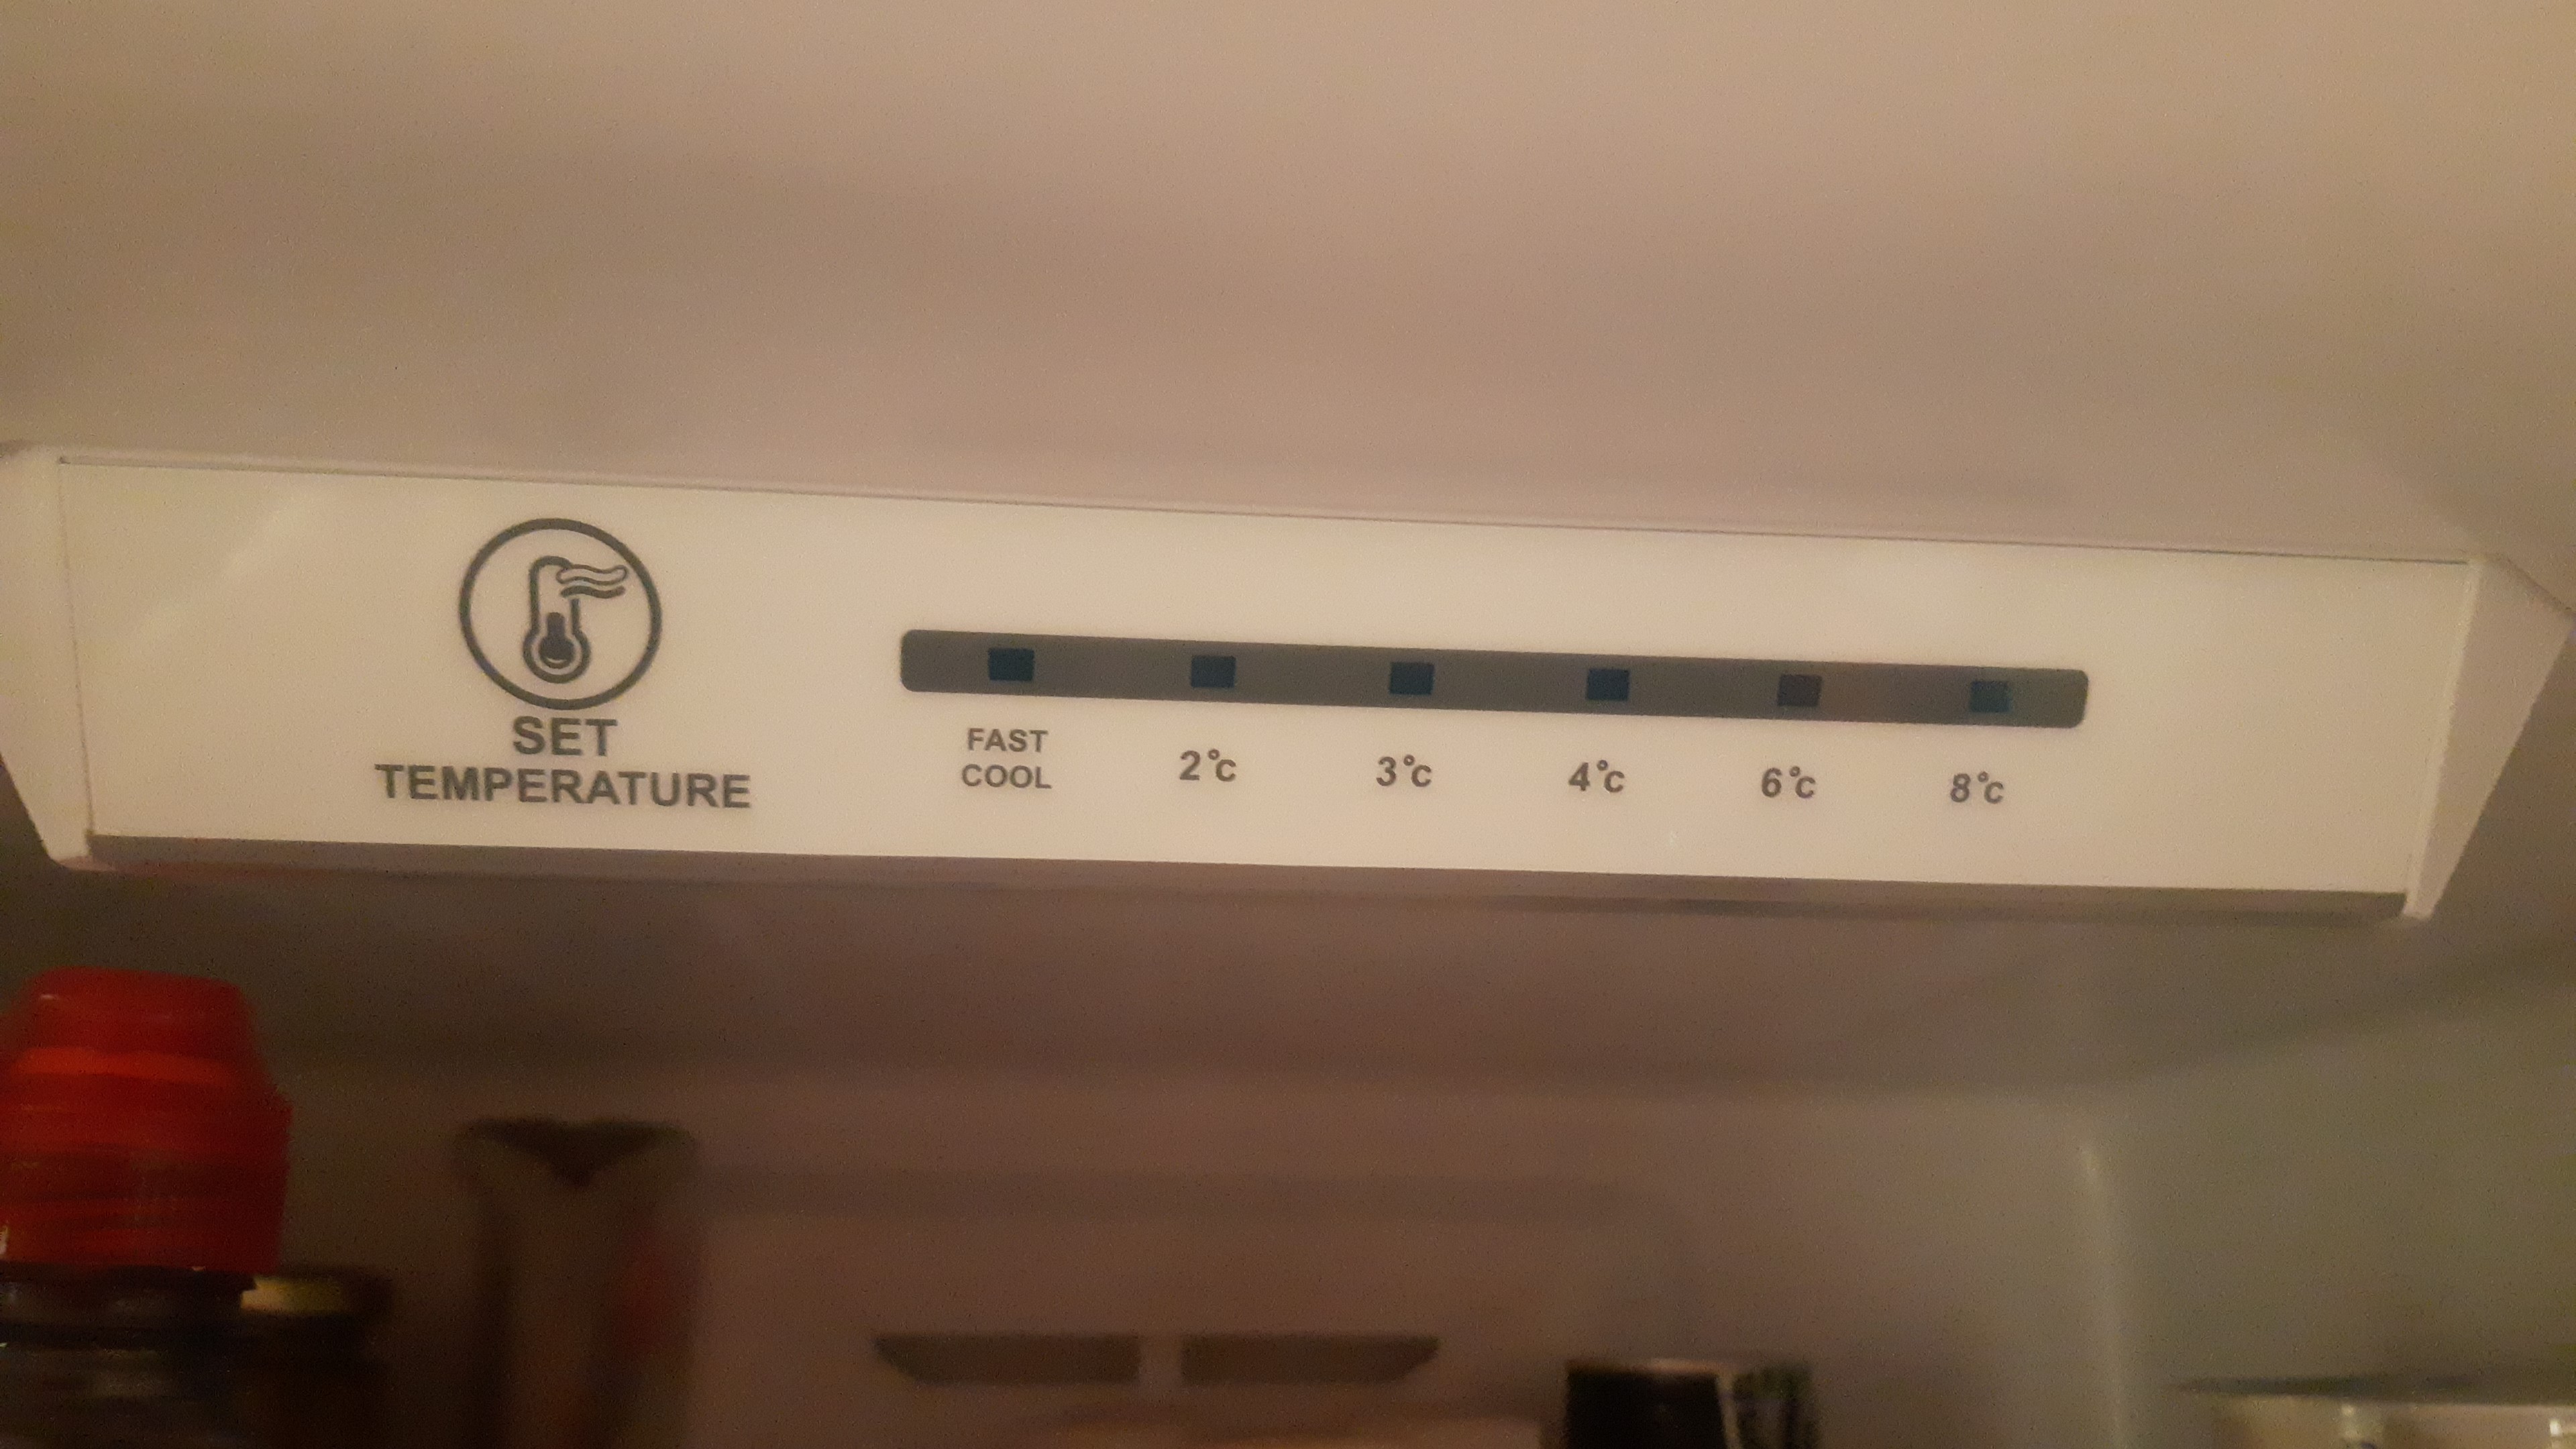 I would like to know at what number my refrigerator cools the most,